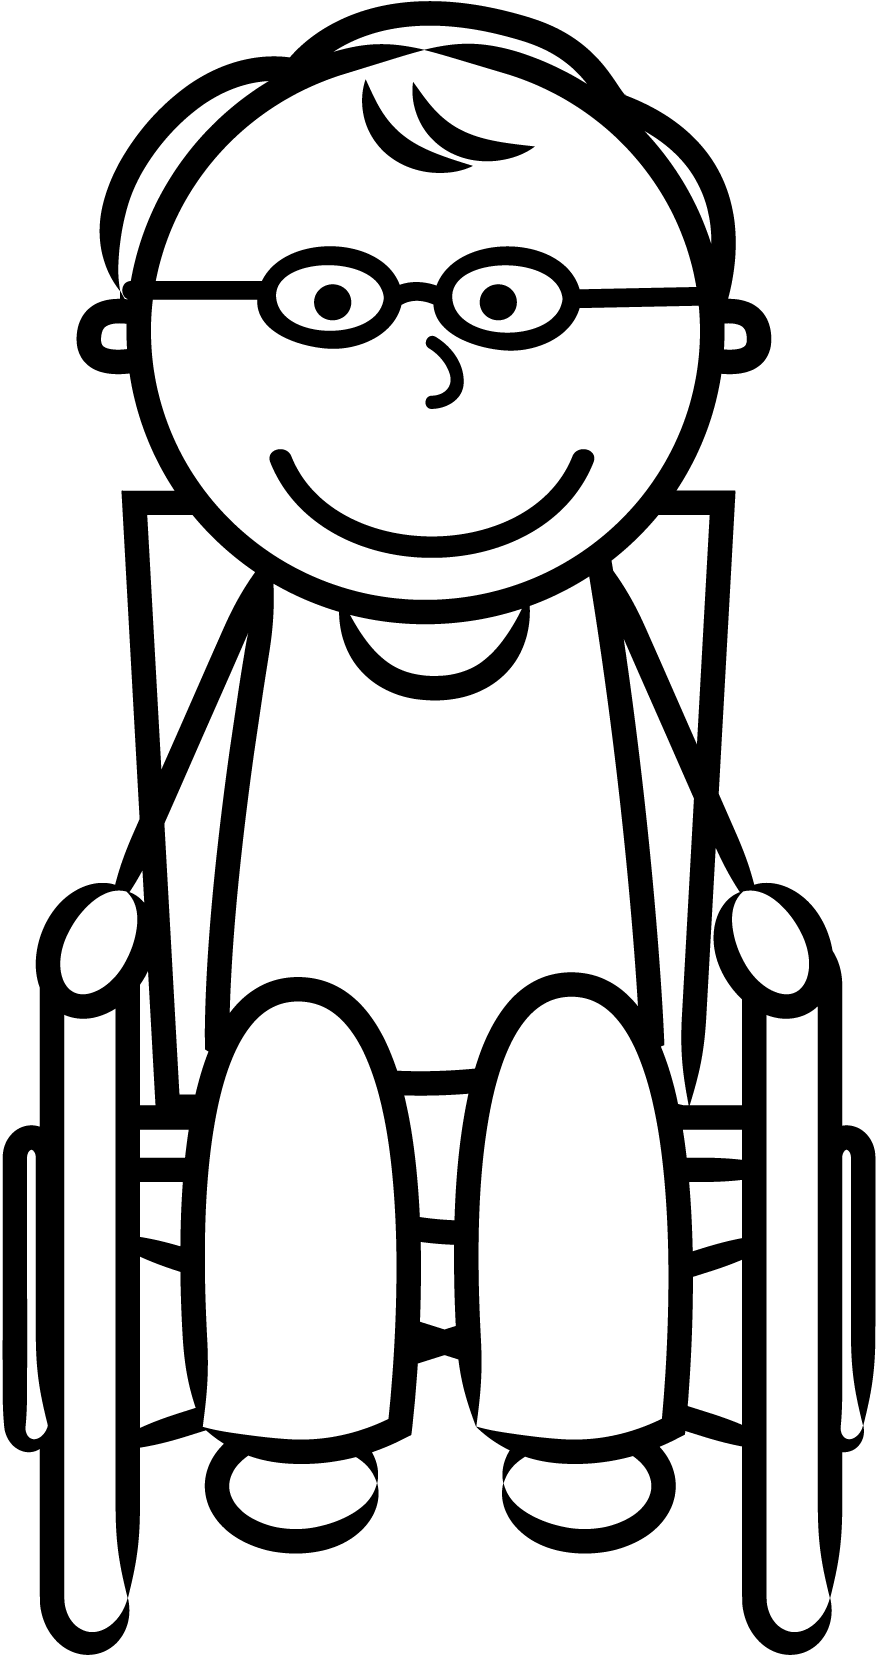 Line drawing of a man in a wheelchair wearing glasses